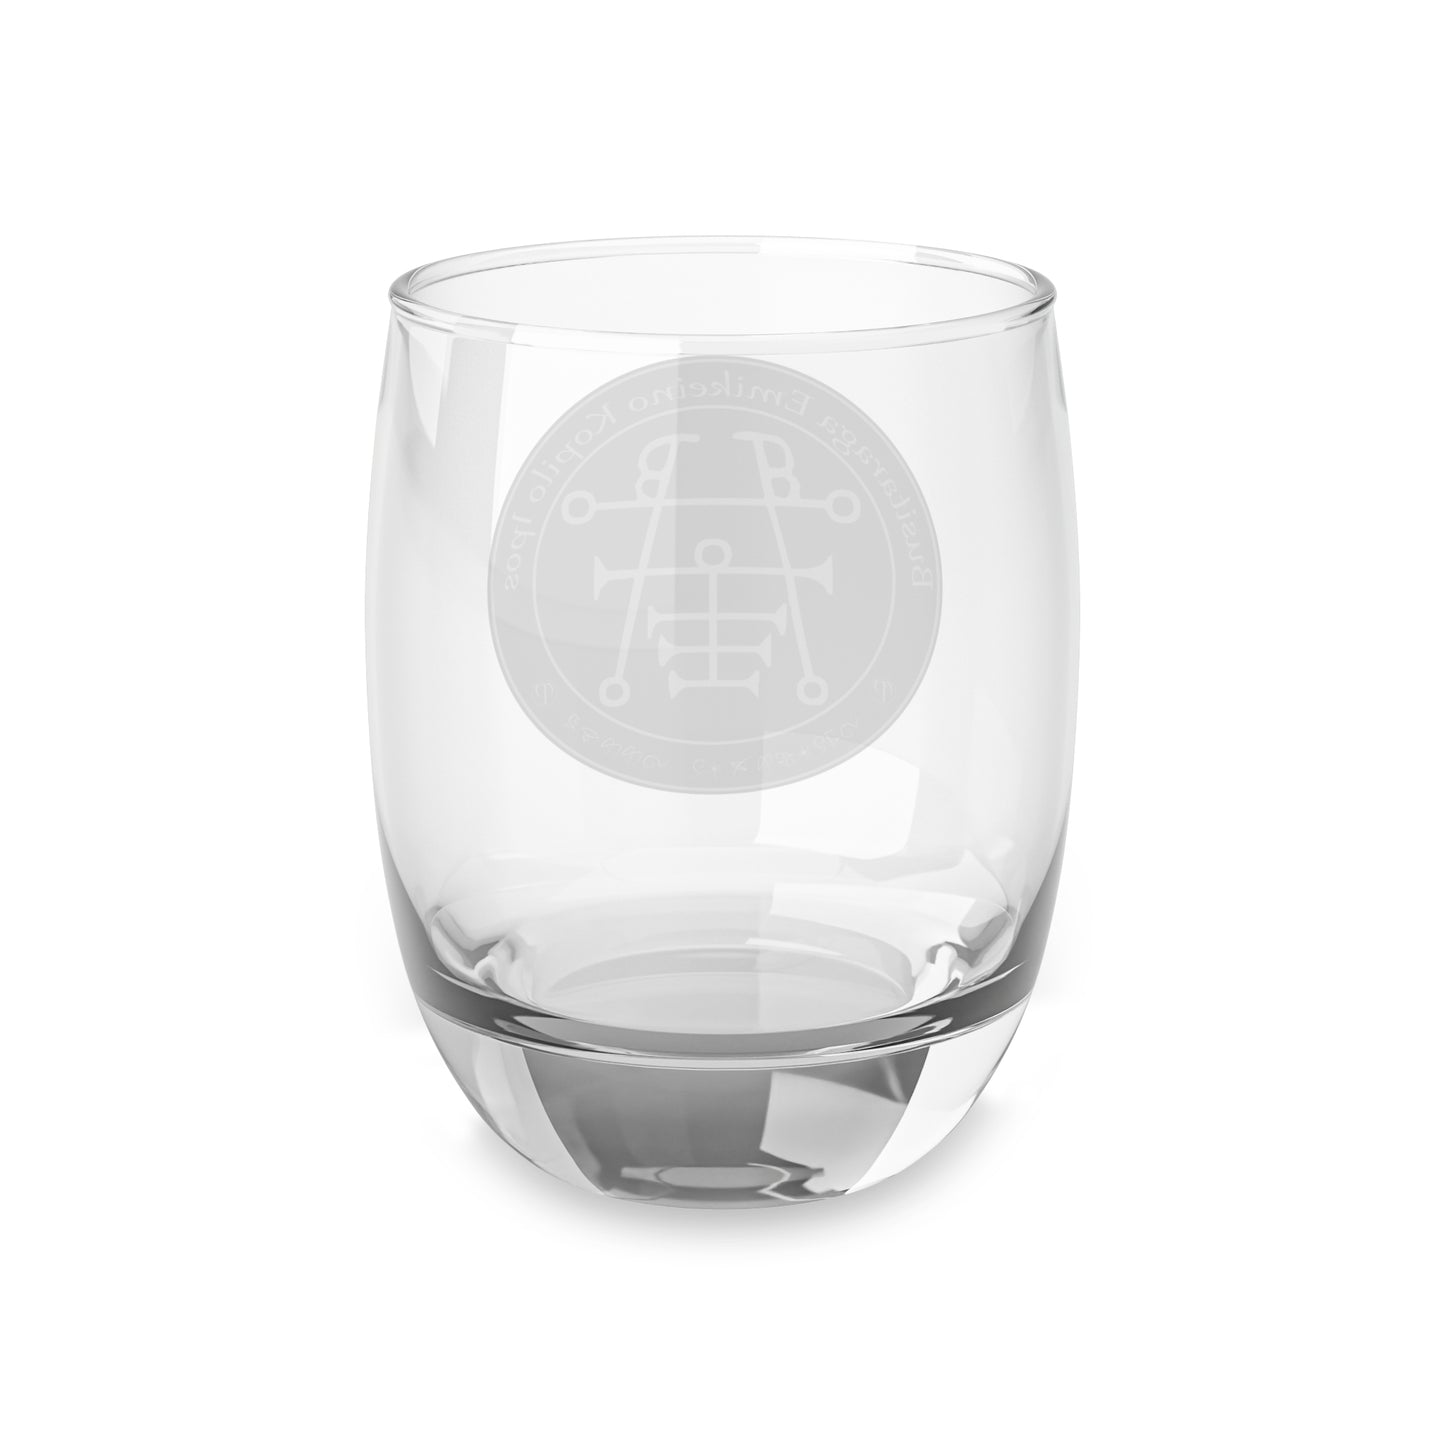 Ipos Sigil Engraved Crystal Offering Glass